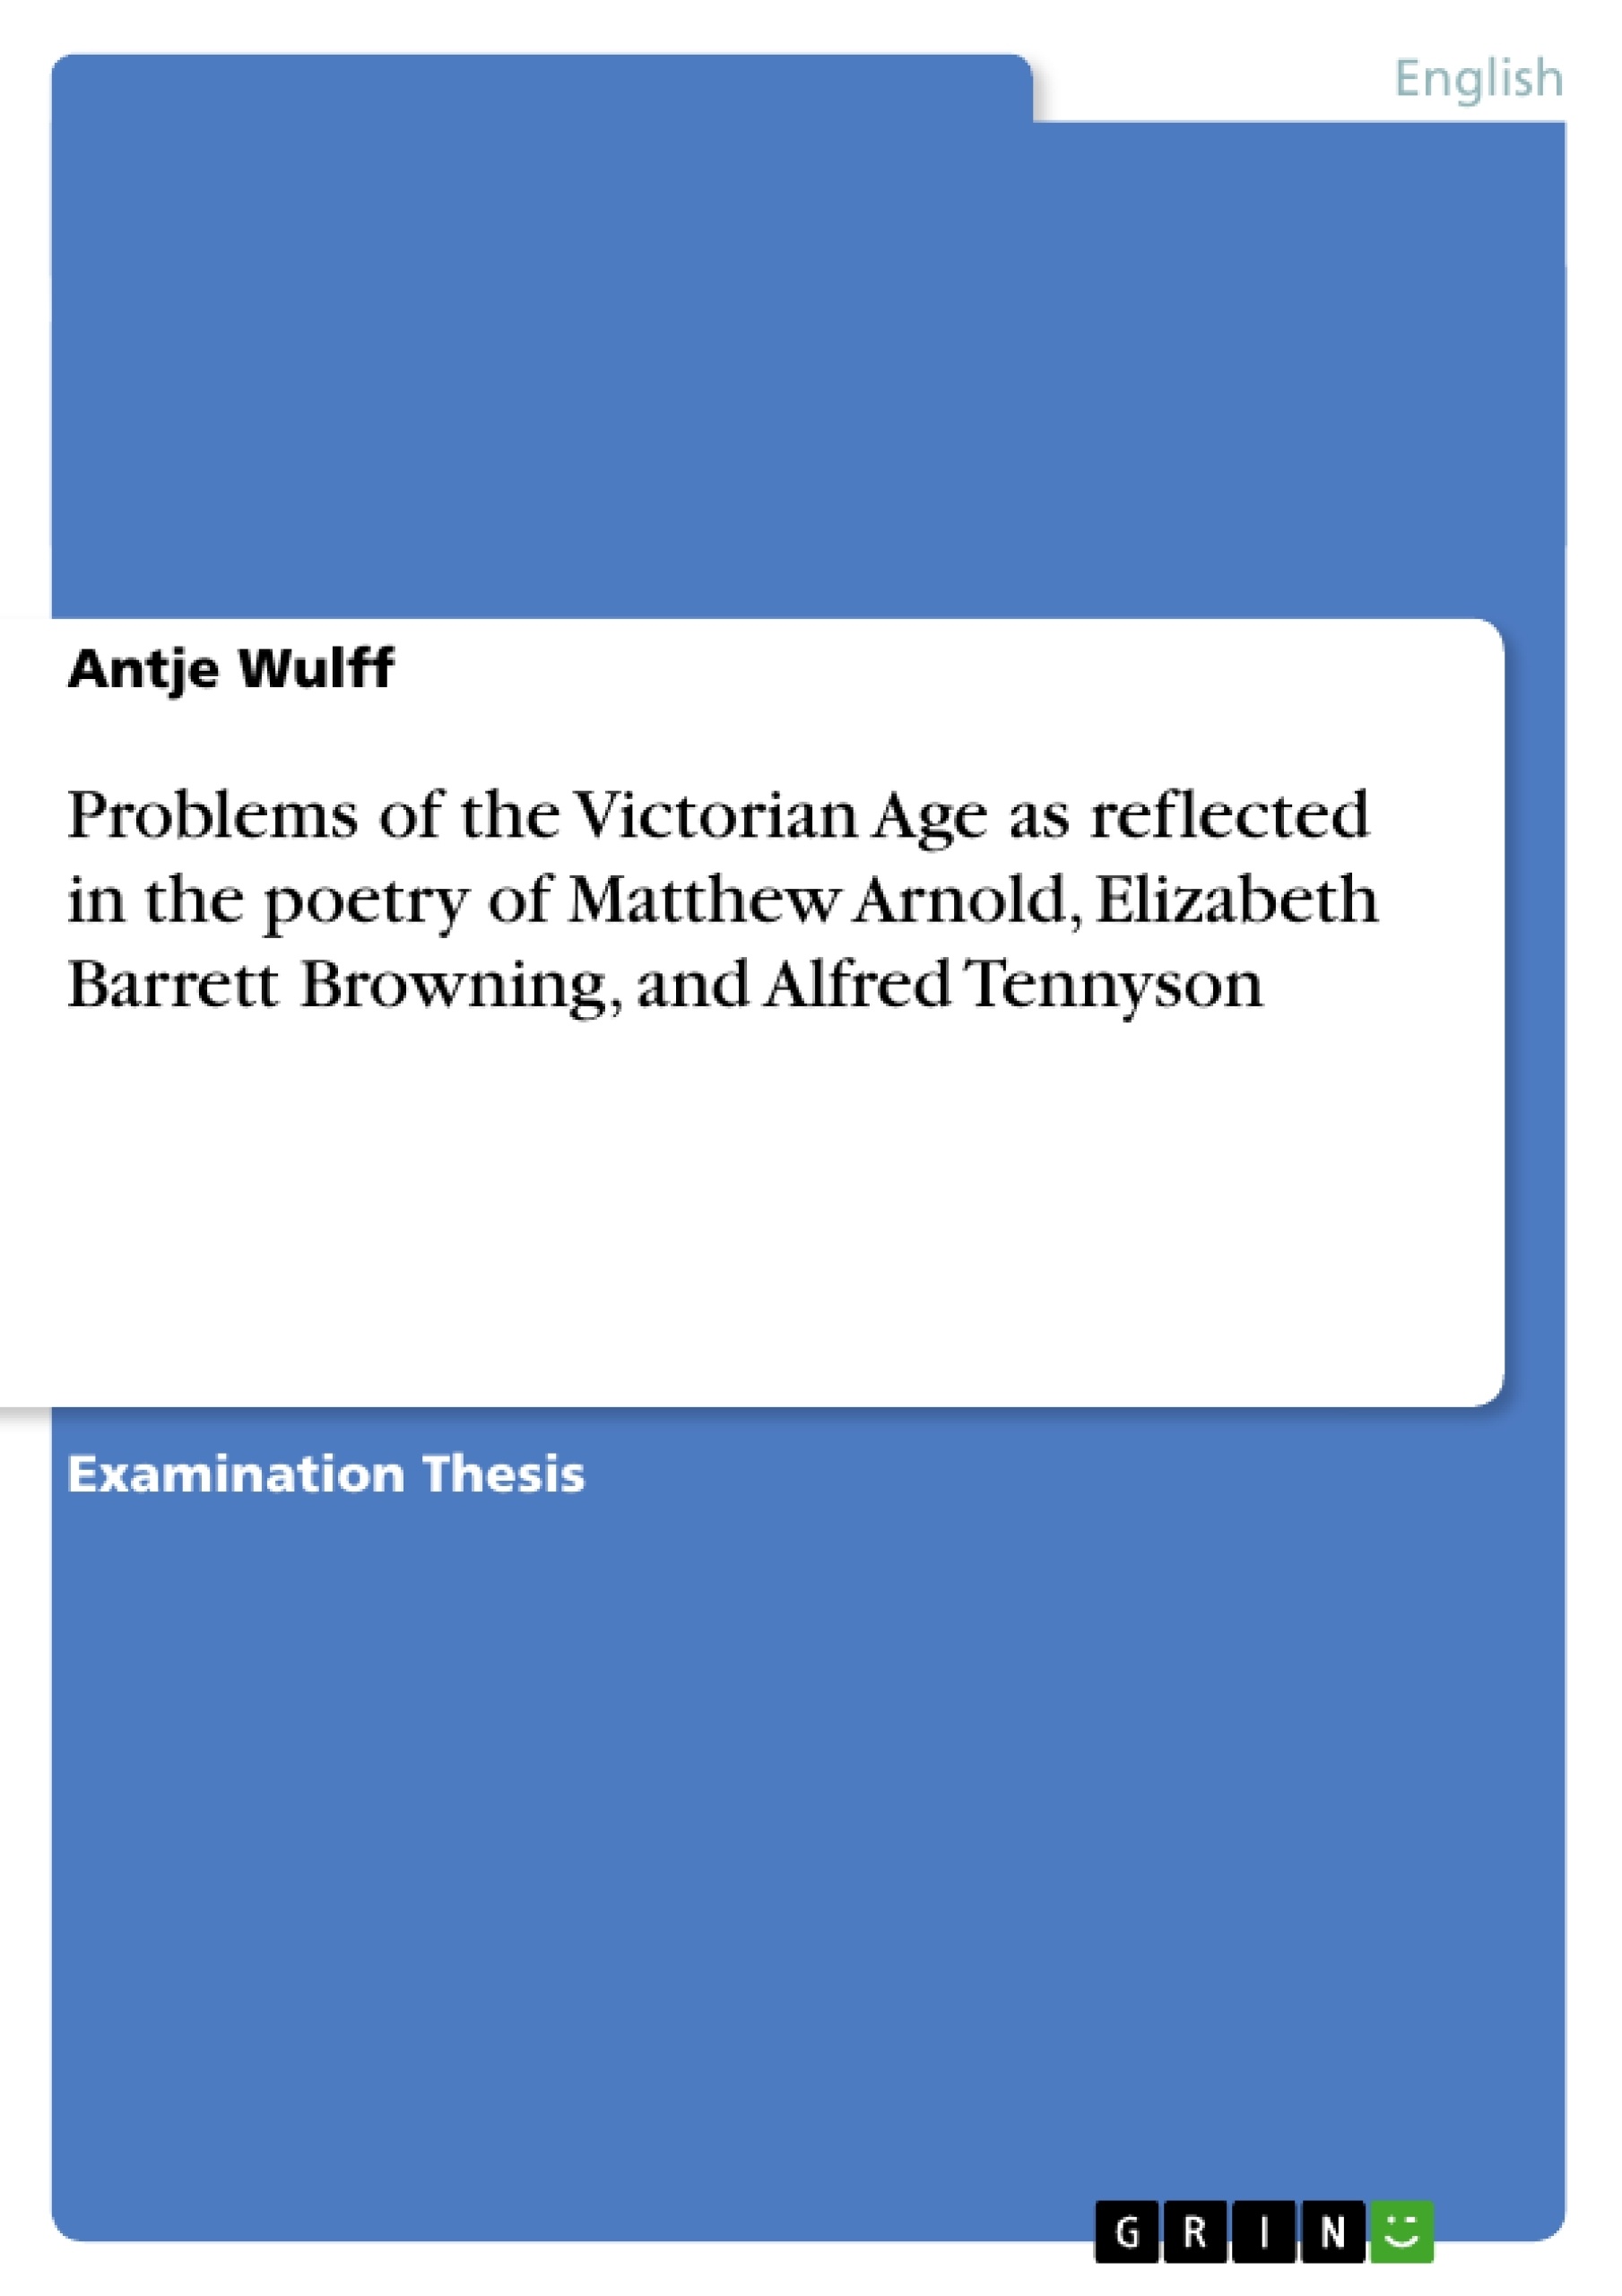 Titre: Problems of the Victorian Age as reflected in the poetry of Matthew Arnold, Elizabeth Barrett Browning, and Alfred Tennyson